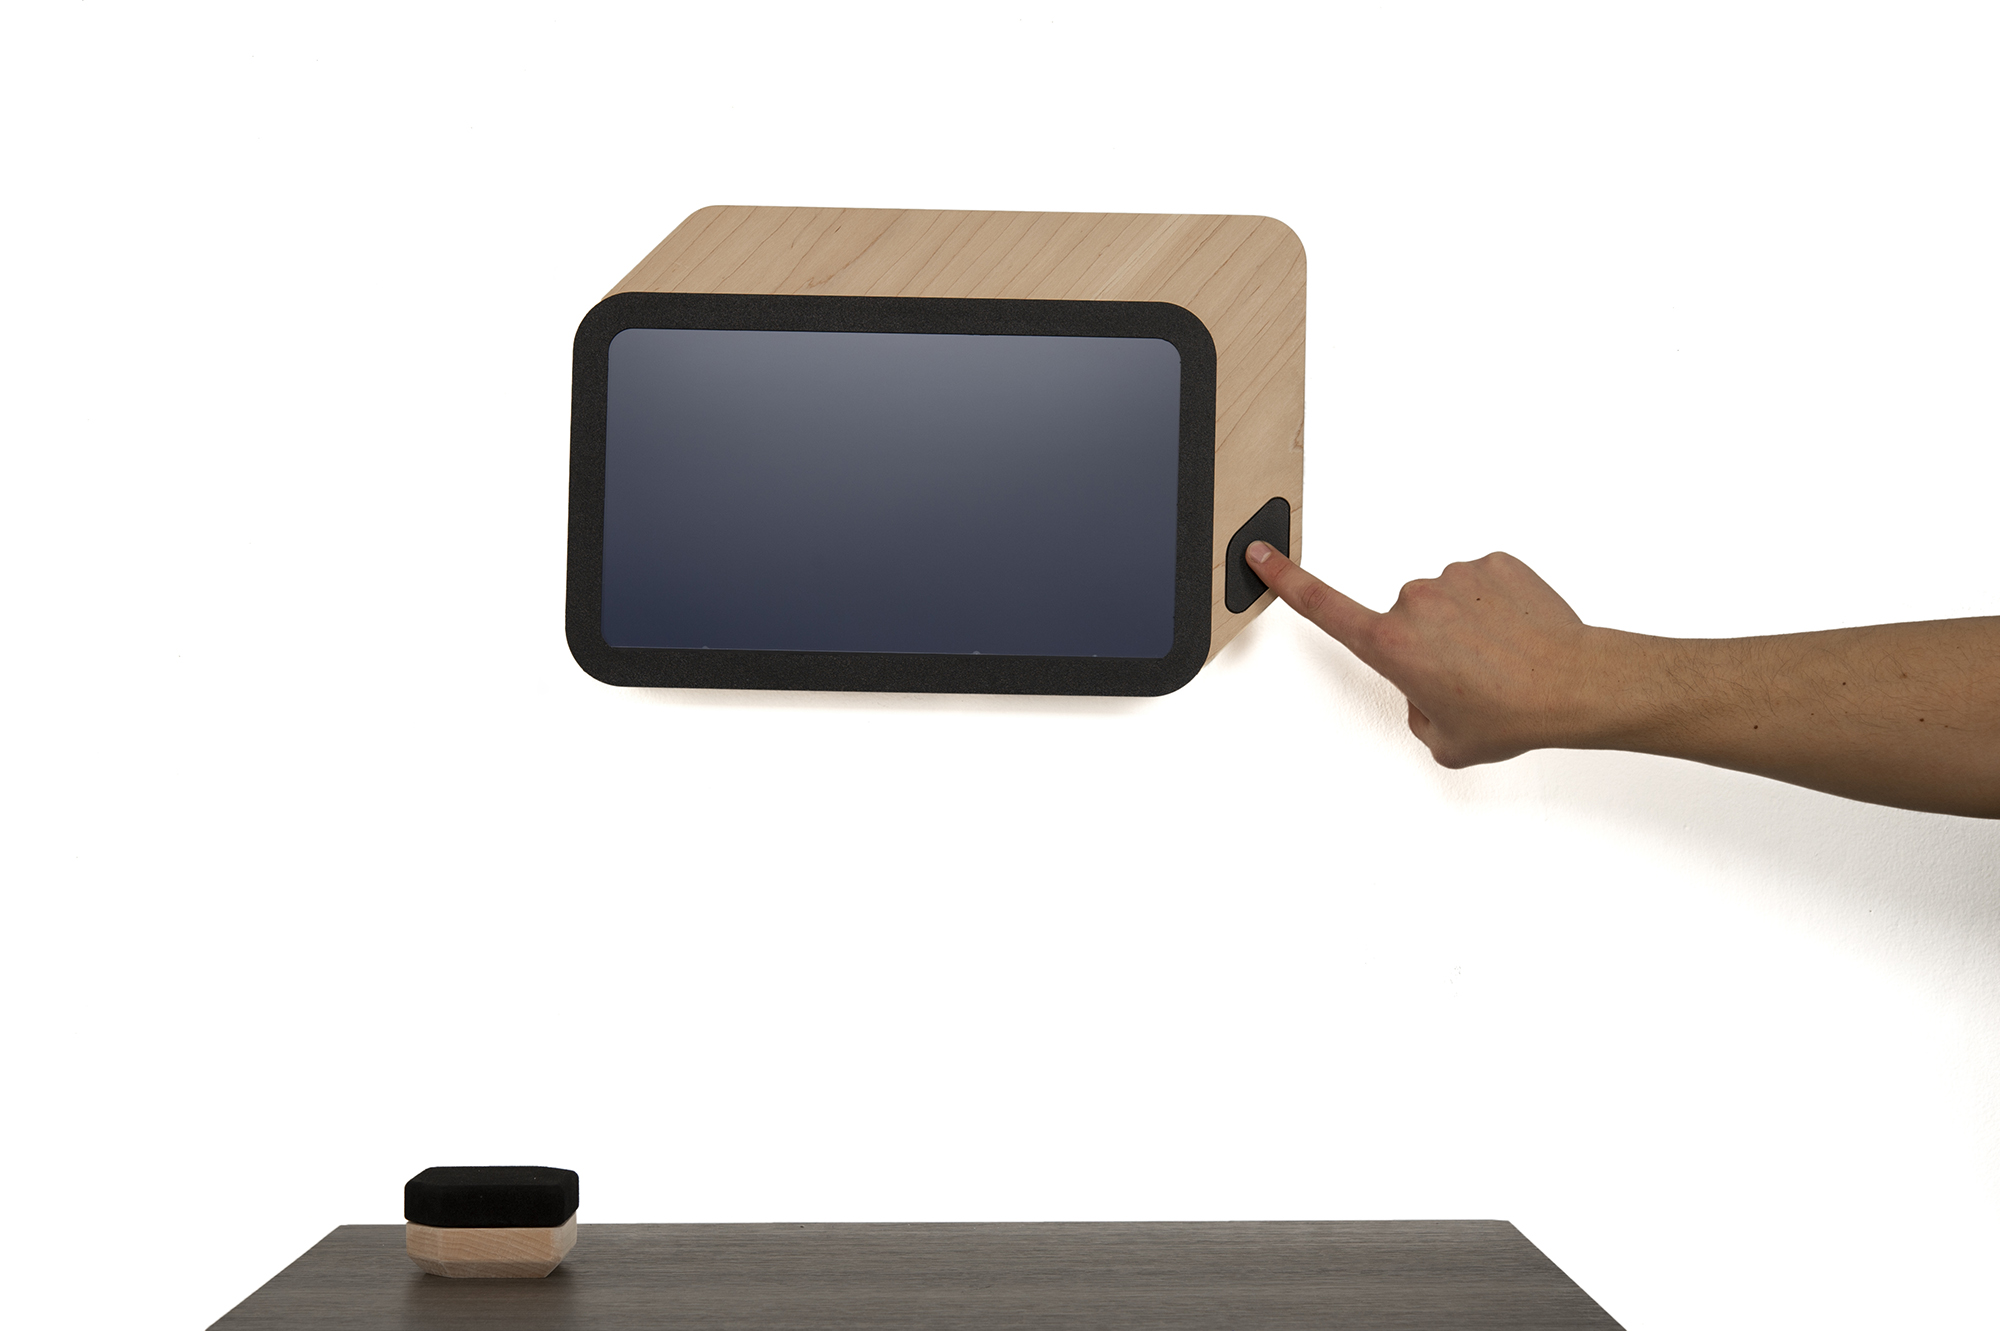 A tablet-looking device wrapped in a wooden box.